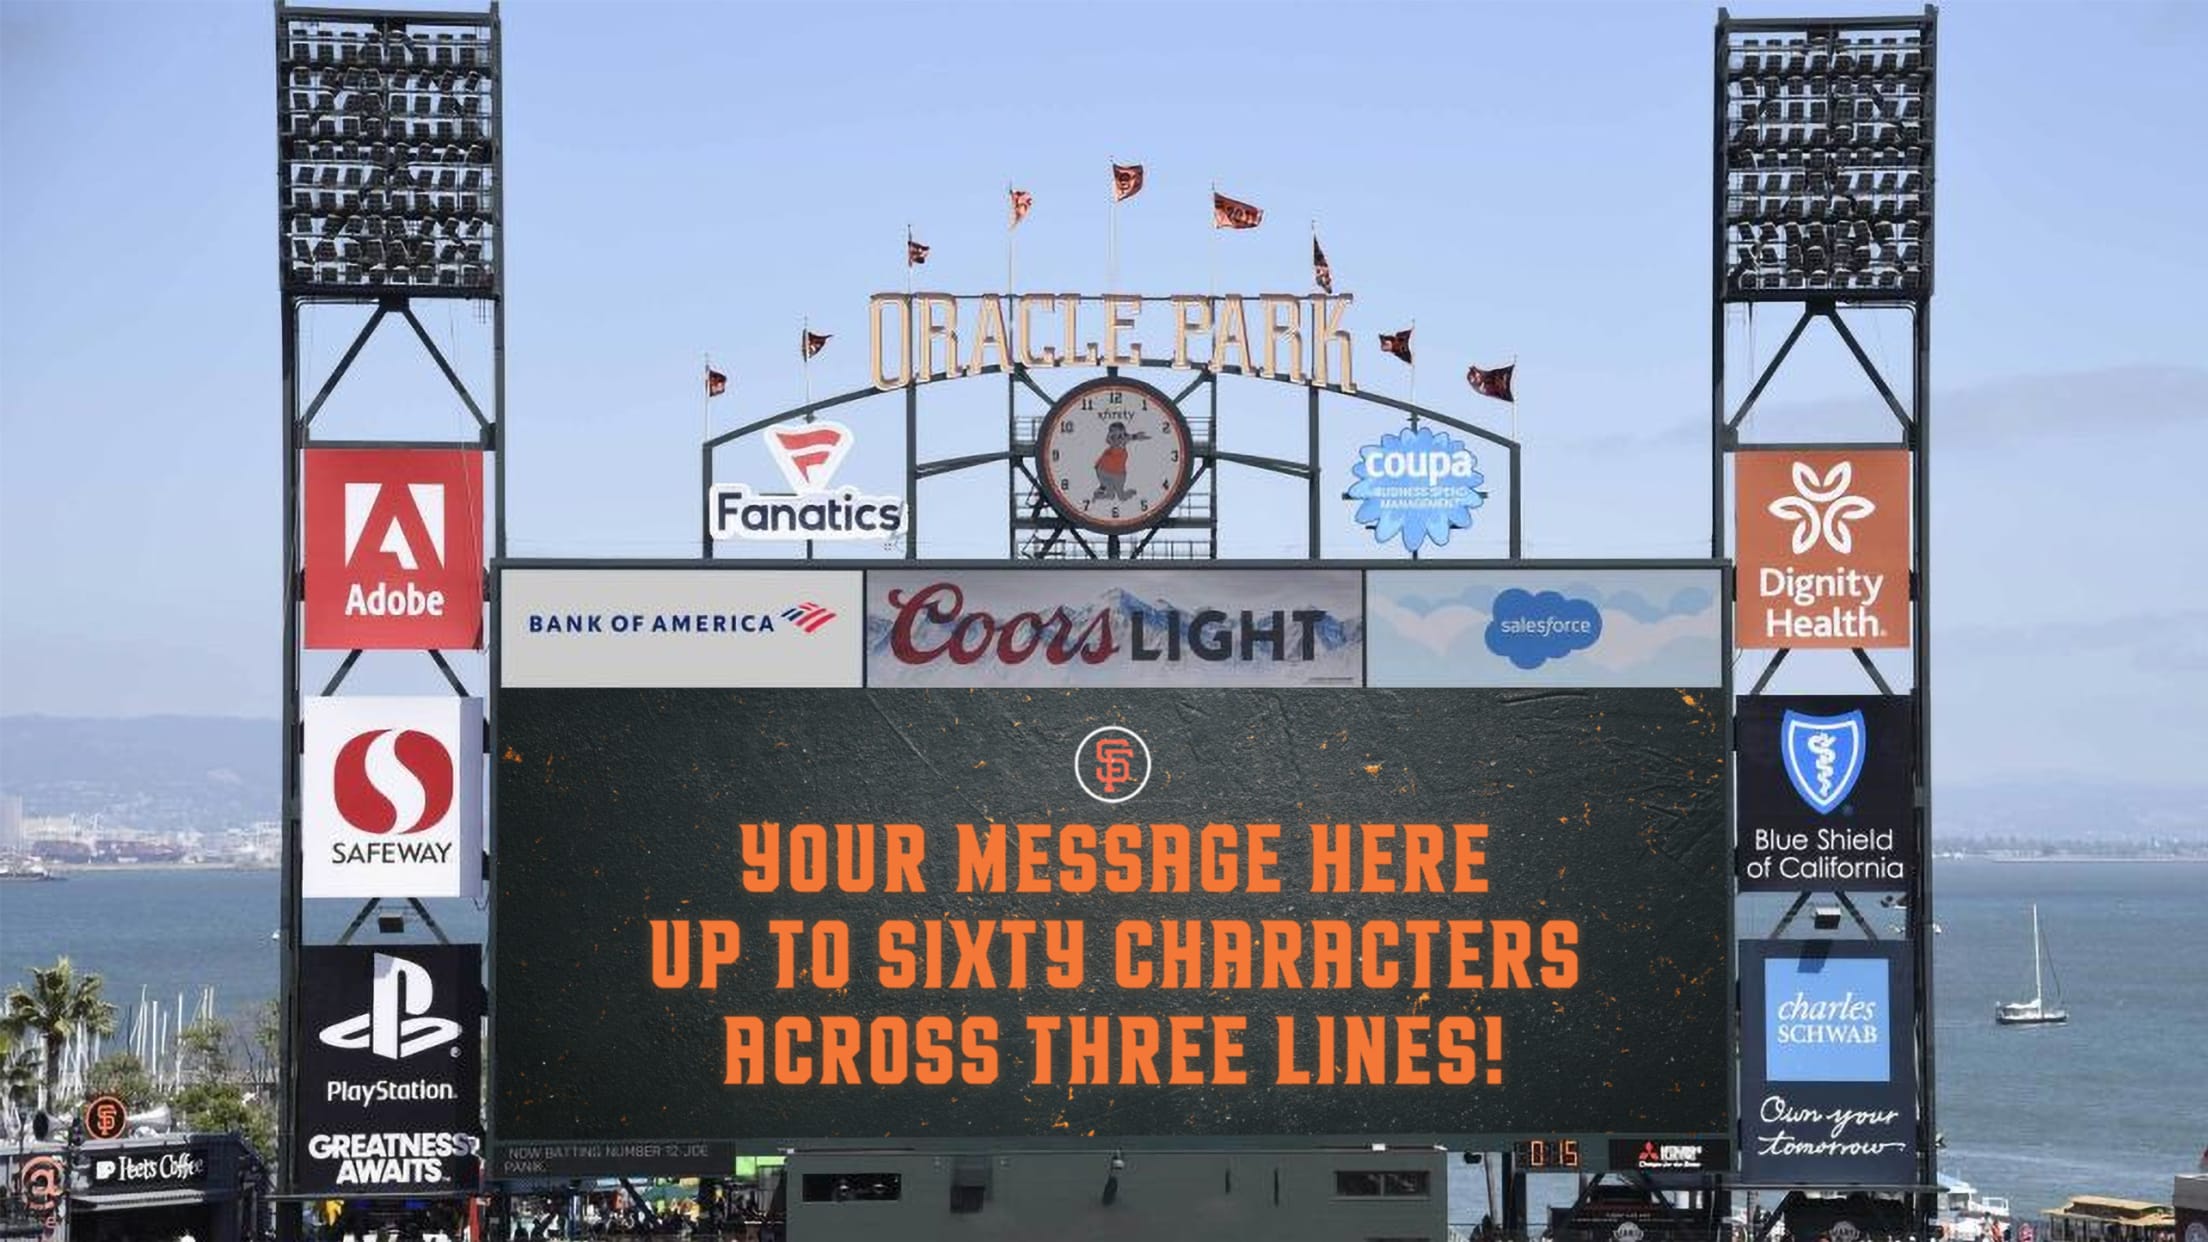 FanSafe at Oracle Park, Concessions & Gameday Experience